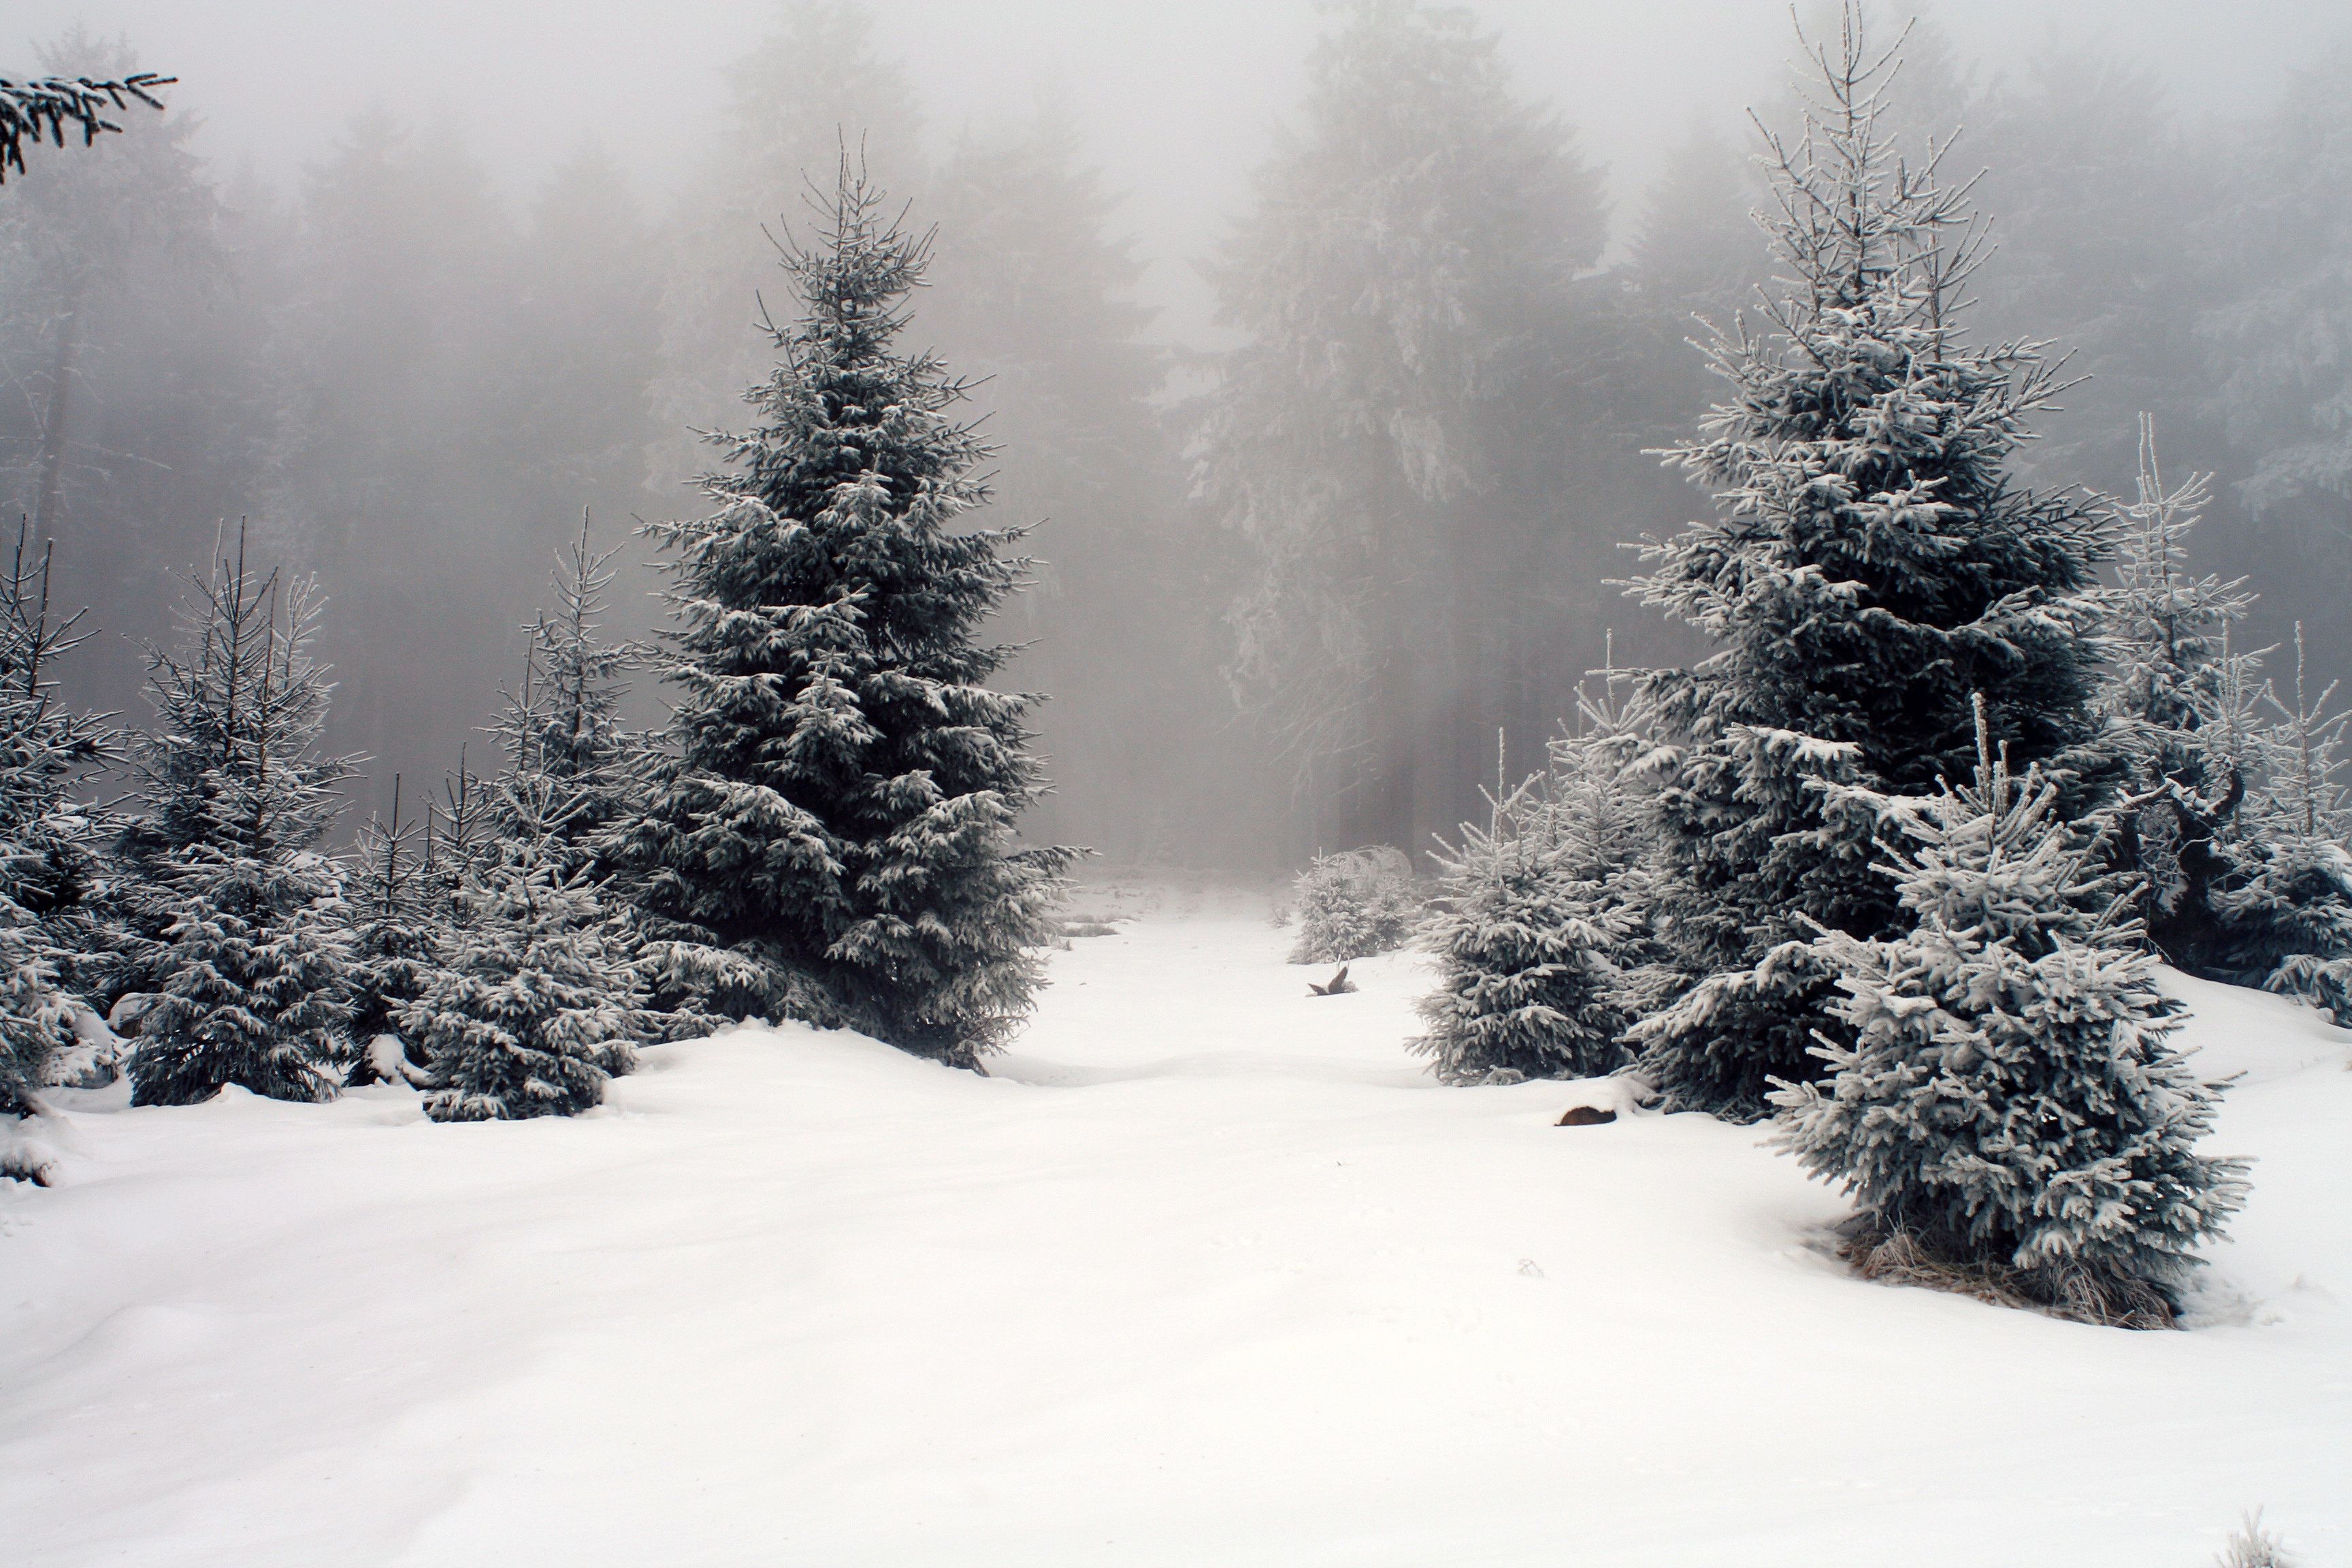 Fog in winter forest. Most beautiful wallpaper stunning natural landscapes. Winter, snow, spruce